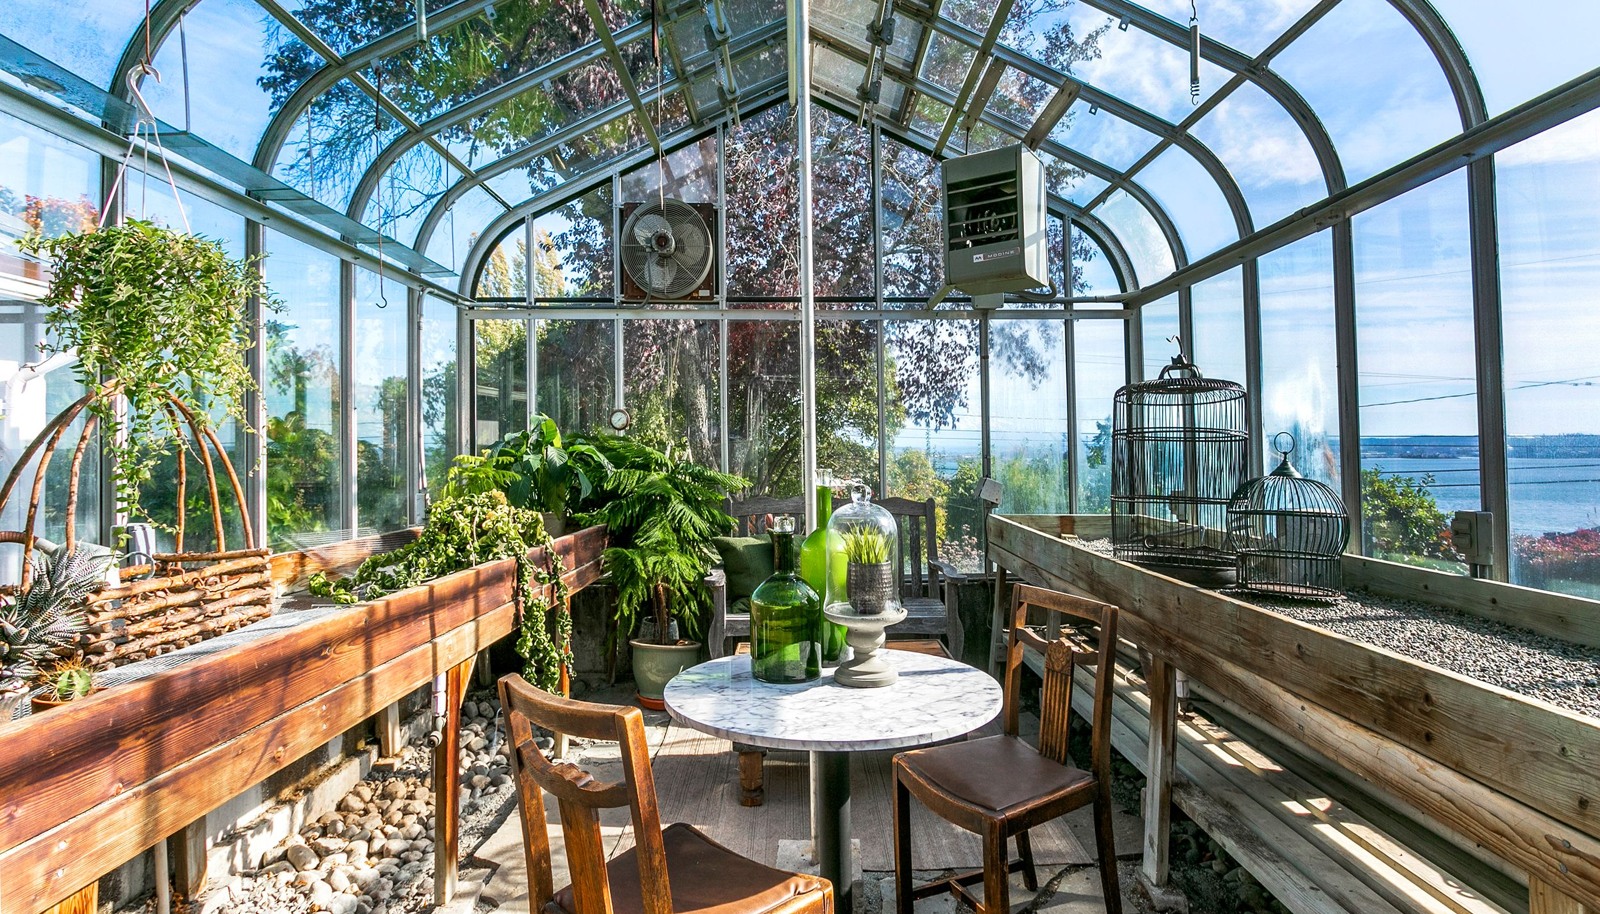 Enormous greenhouse for your gardening pleasure or unique venue for hosting dinner parties.